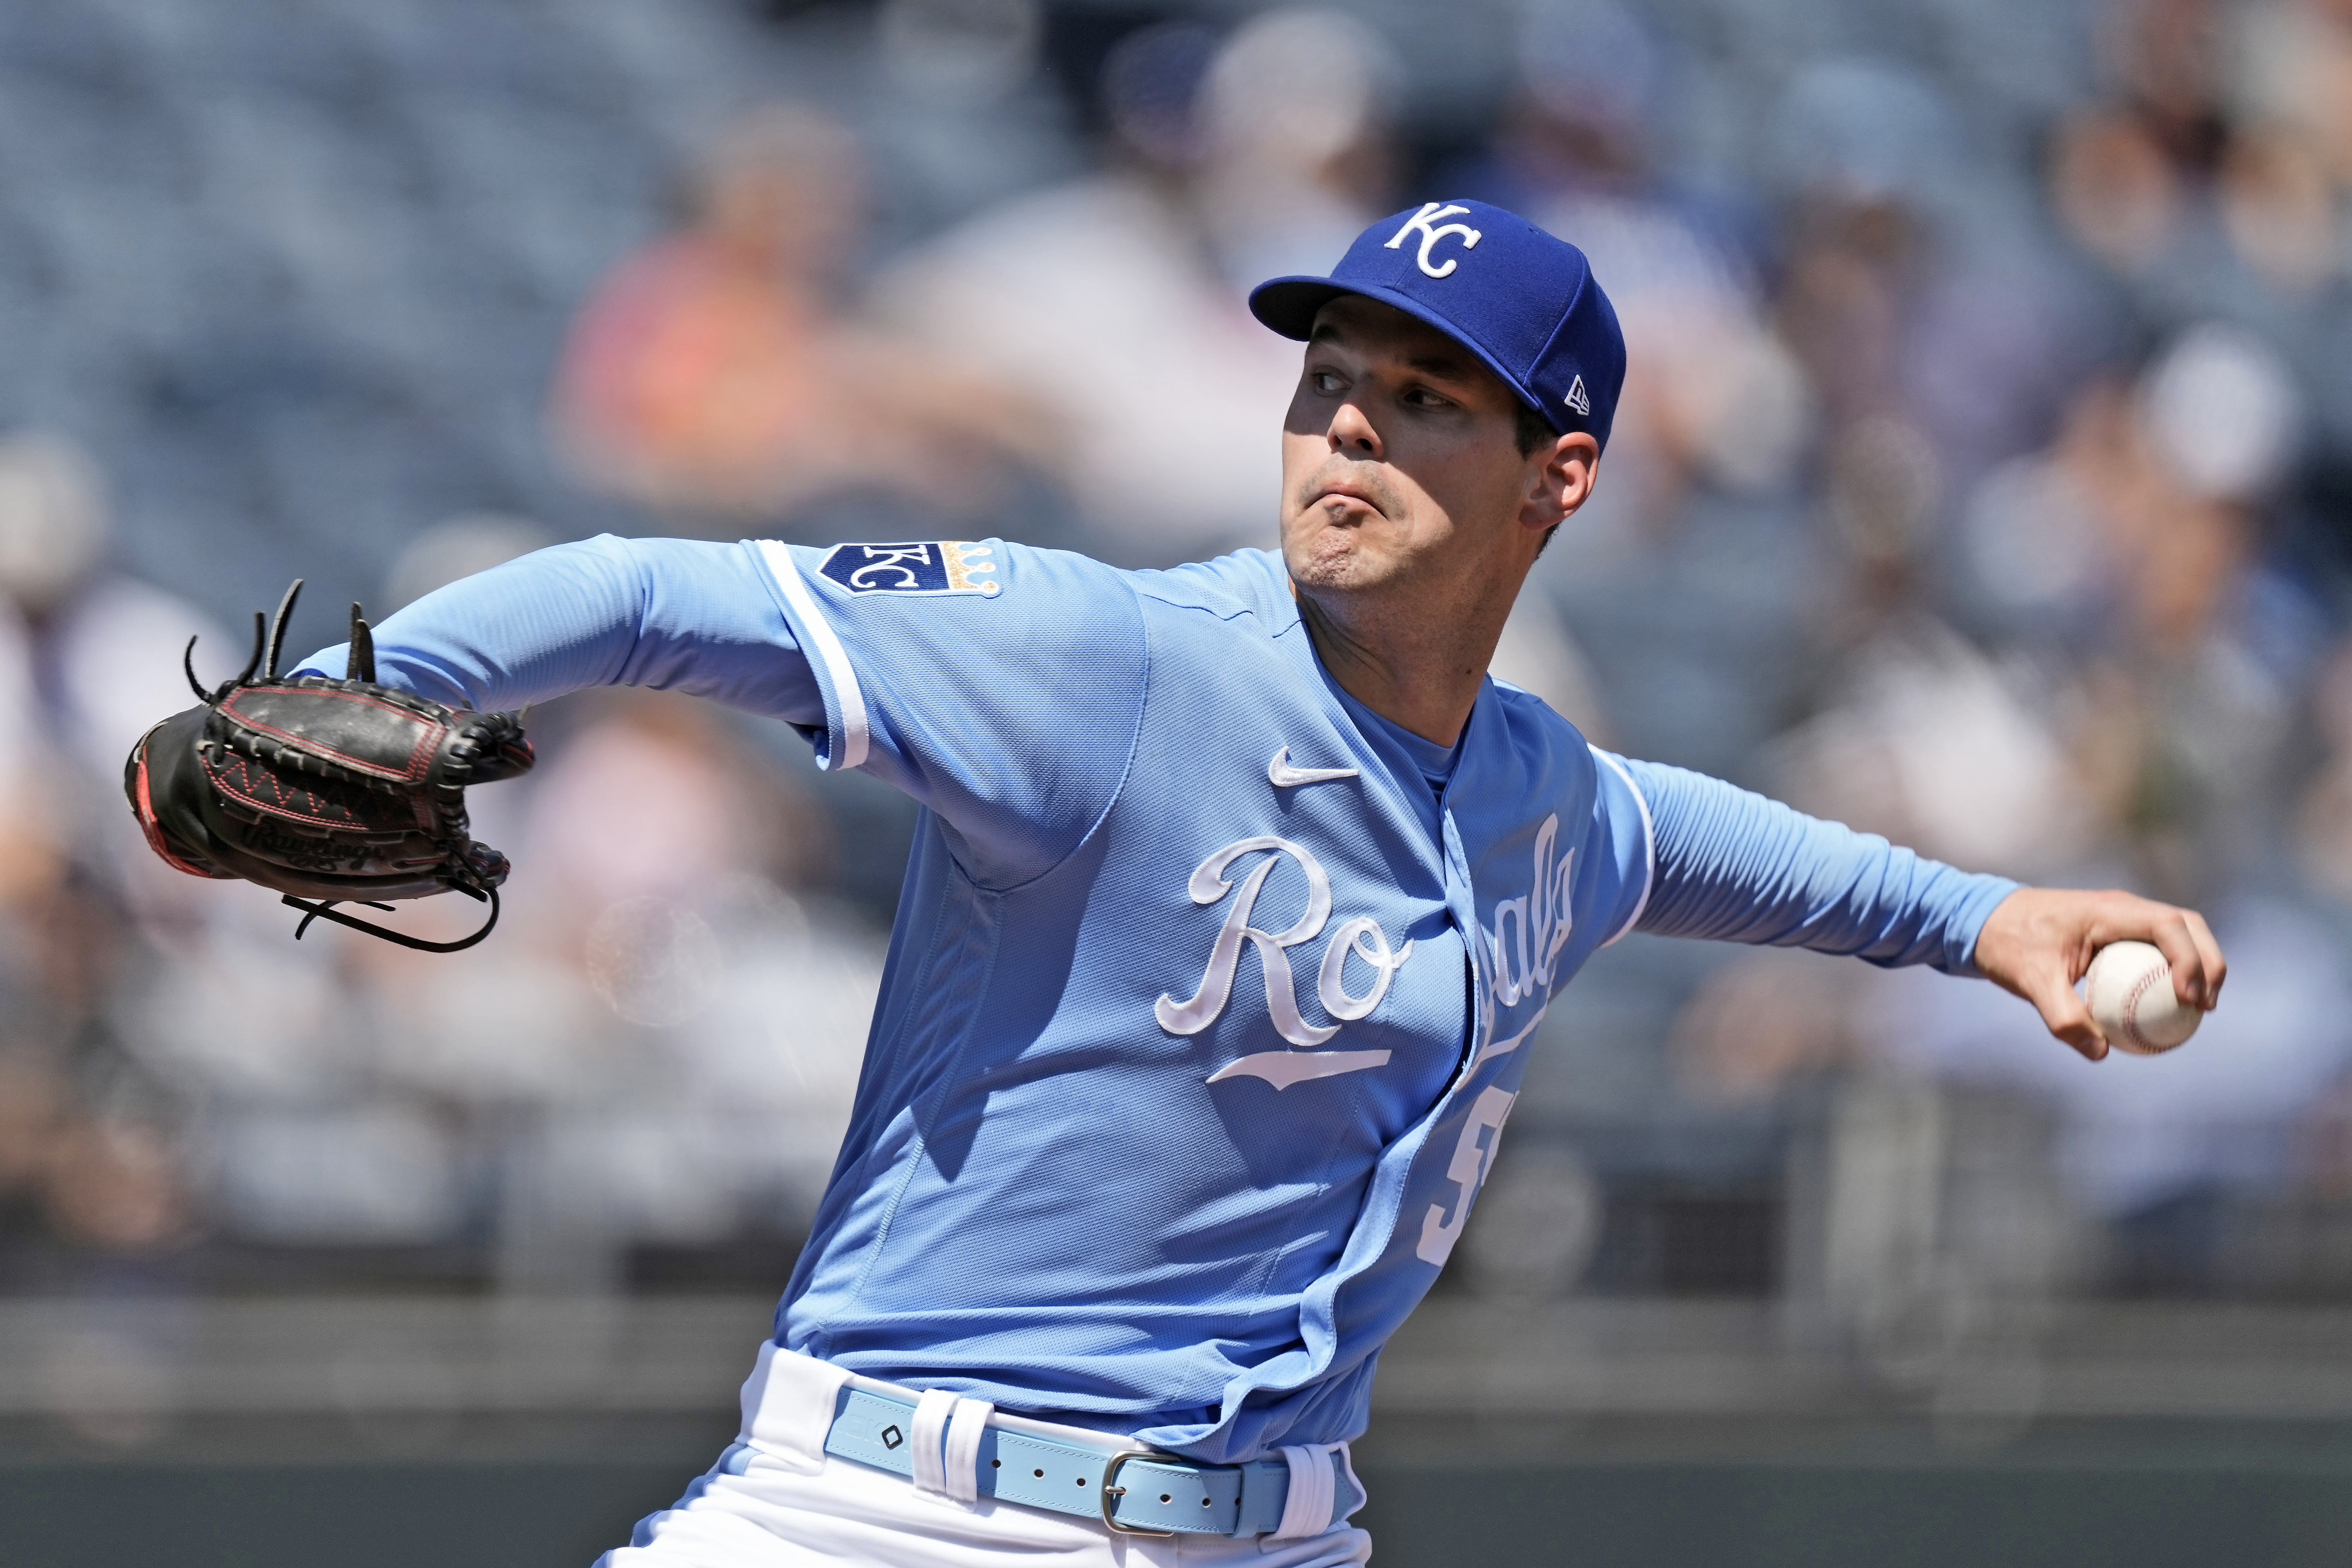 Royals win on another balk-off, 7-6 over White Sox